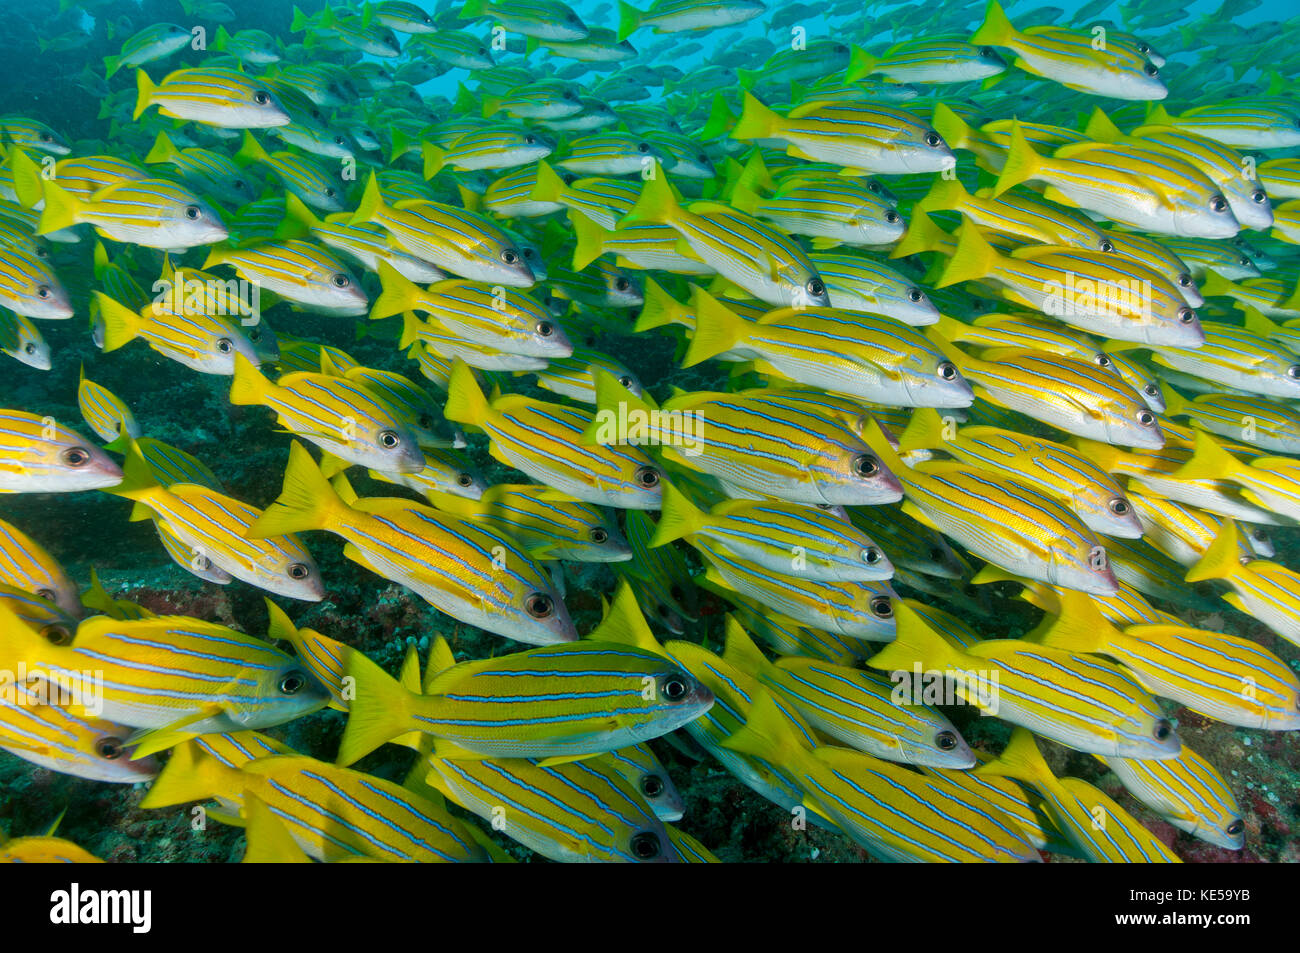 Large school of blue-lined snapper blocking out the surface, Maldives. Stock Photo